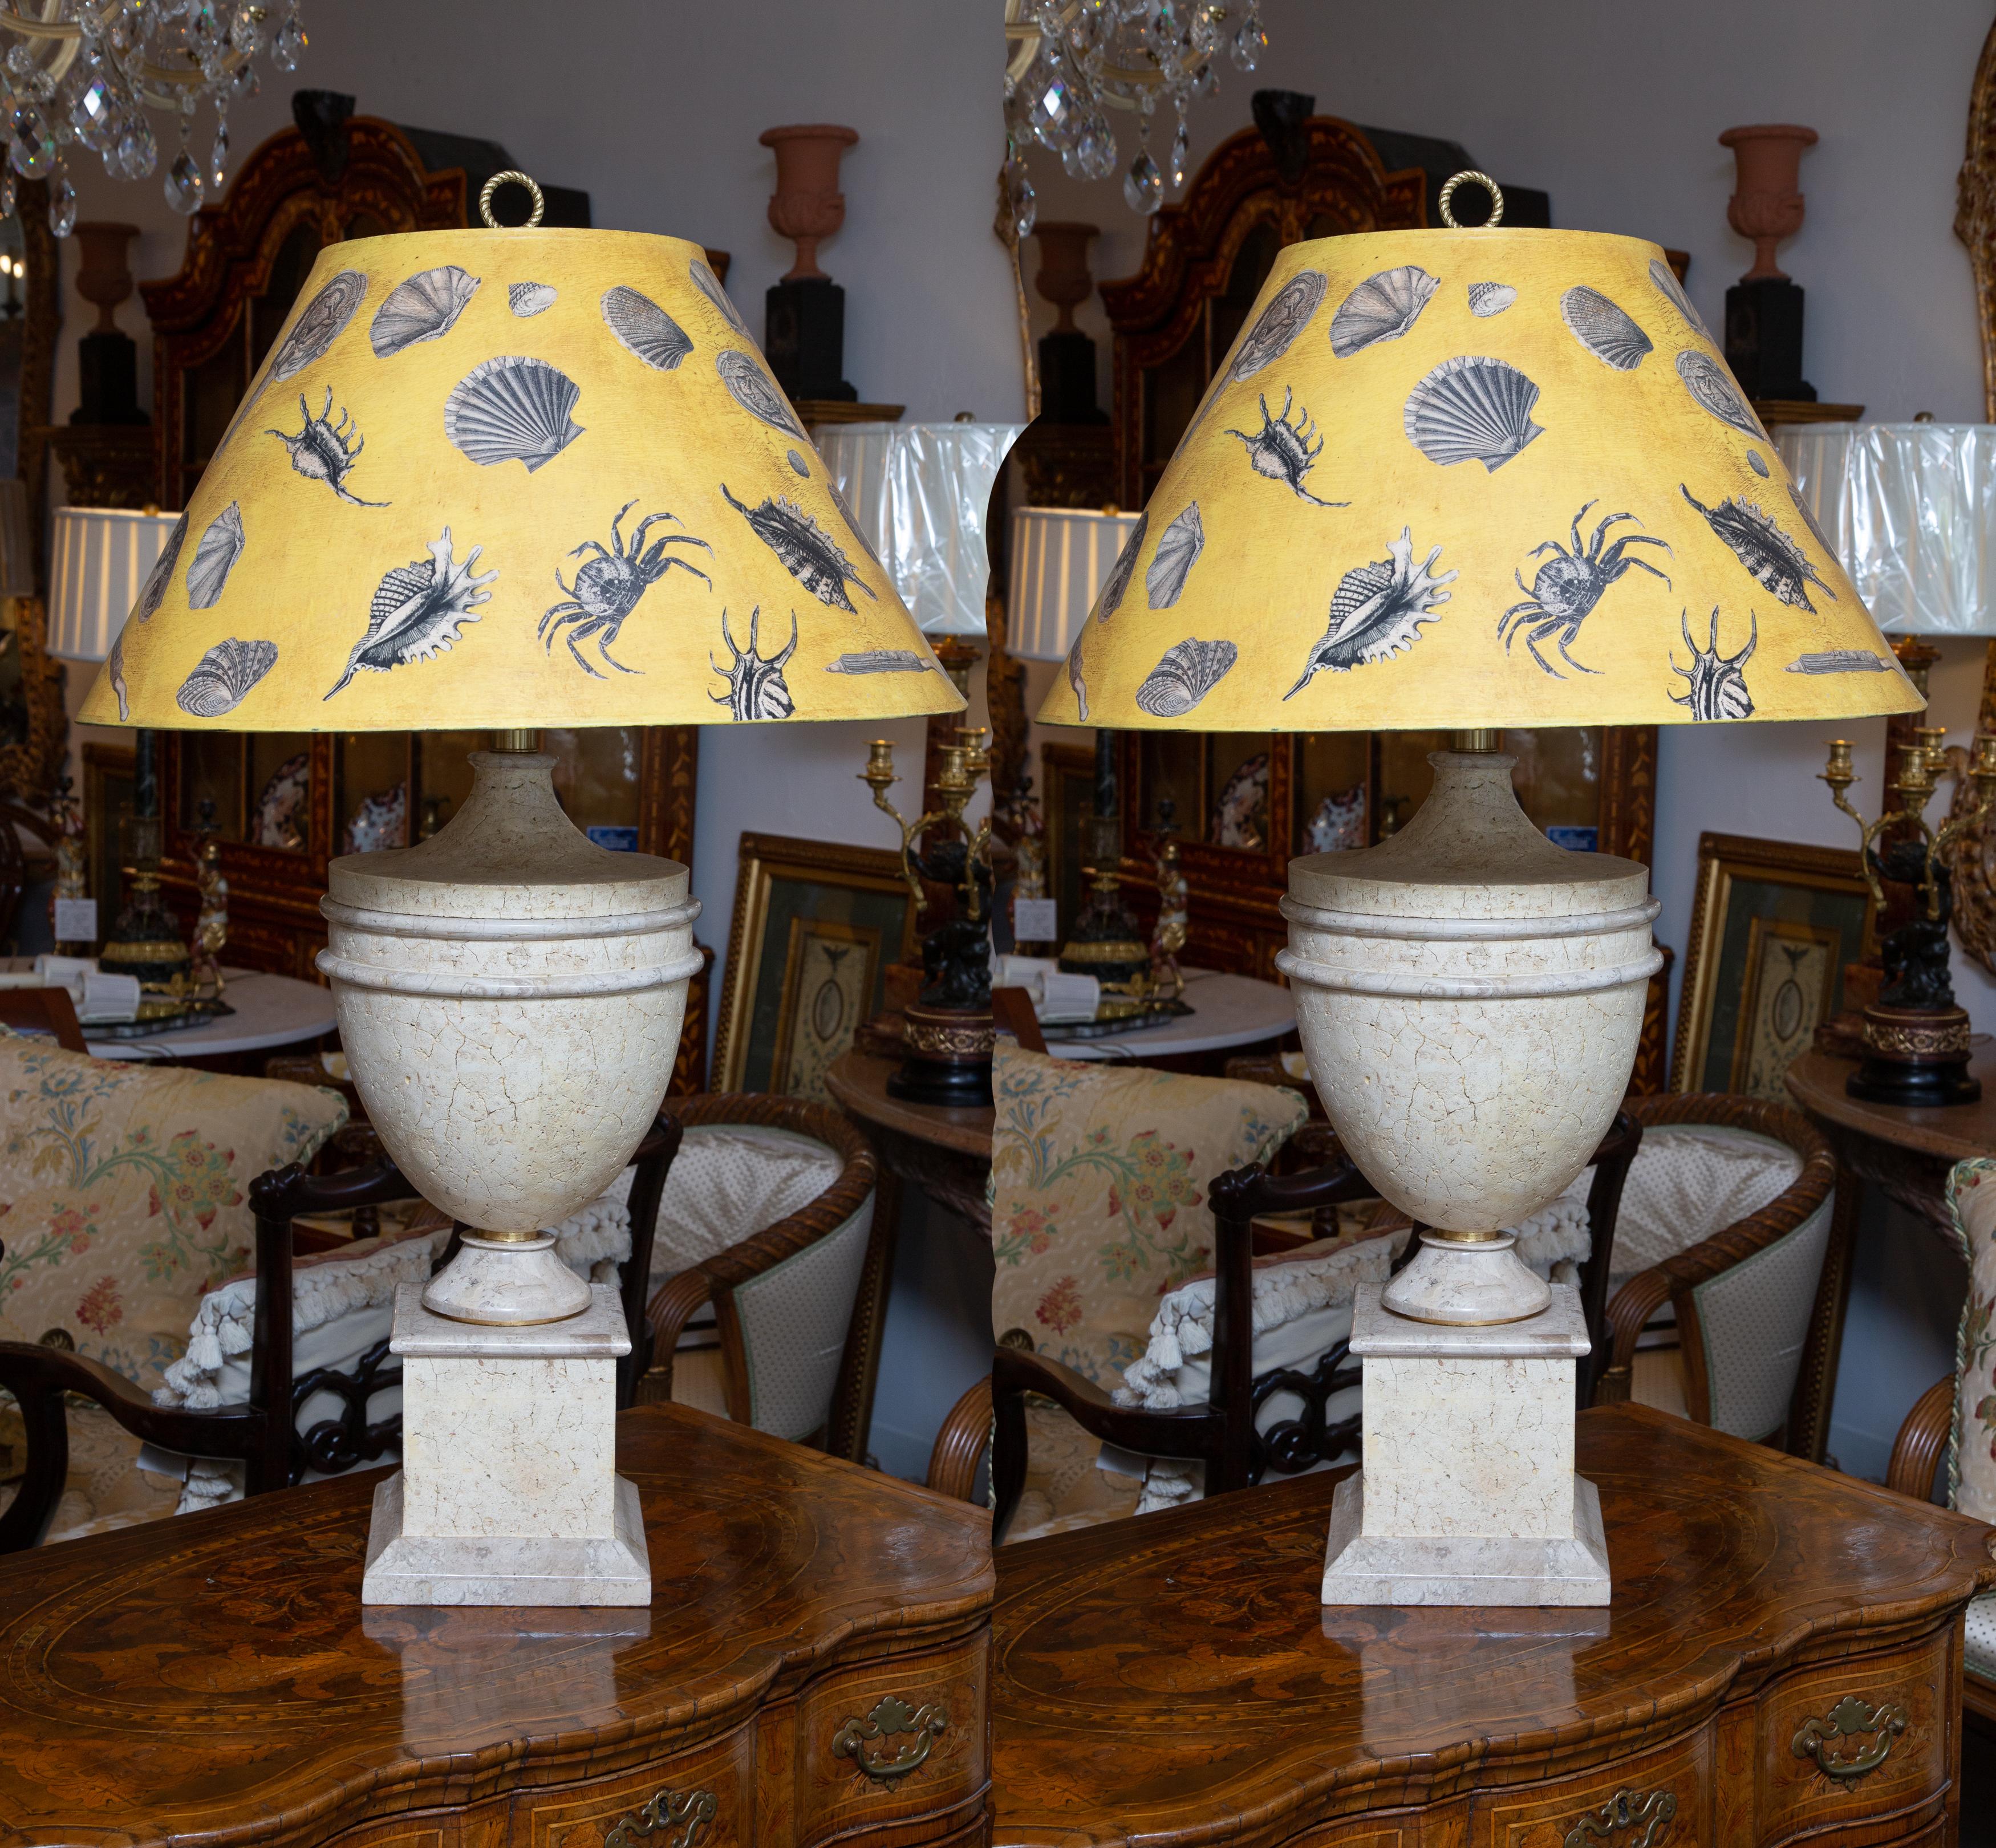 This is a very elegant pair of faux stone urn form table lamps with decorative hand-made custom shades, 20th century.